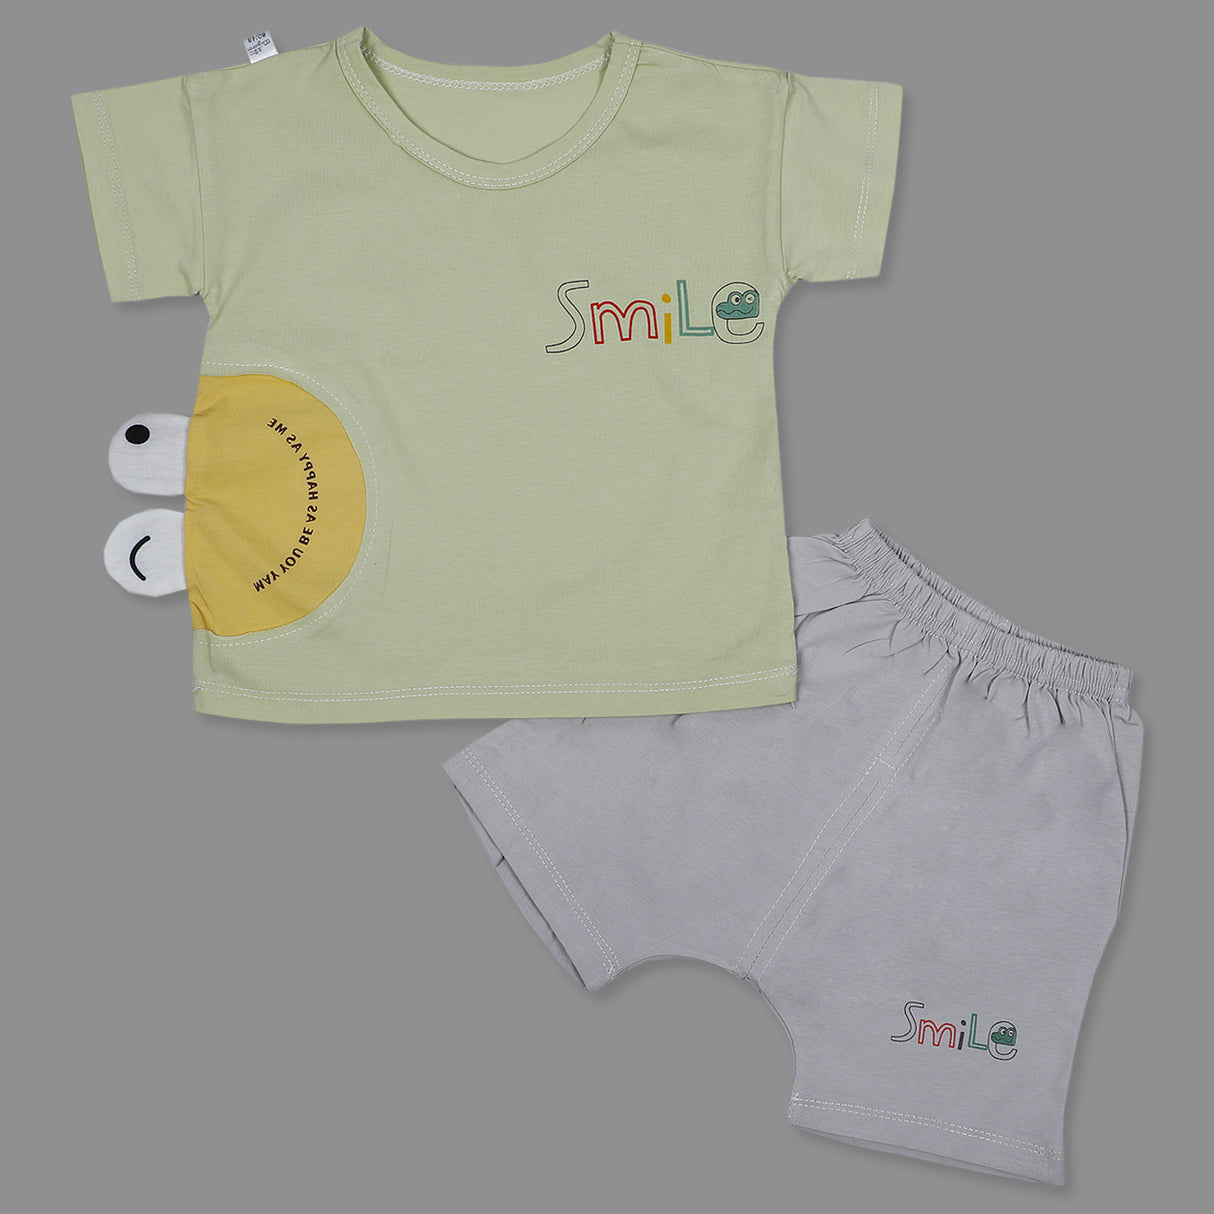 Smile Infant Half Sleeve Top And Bottom Baba Suit